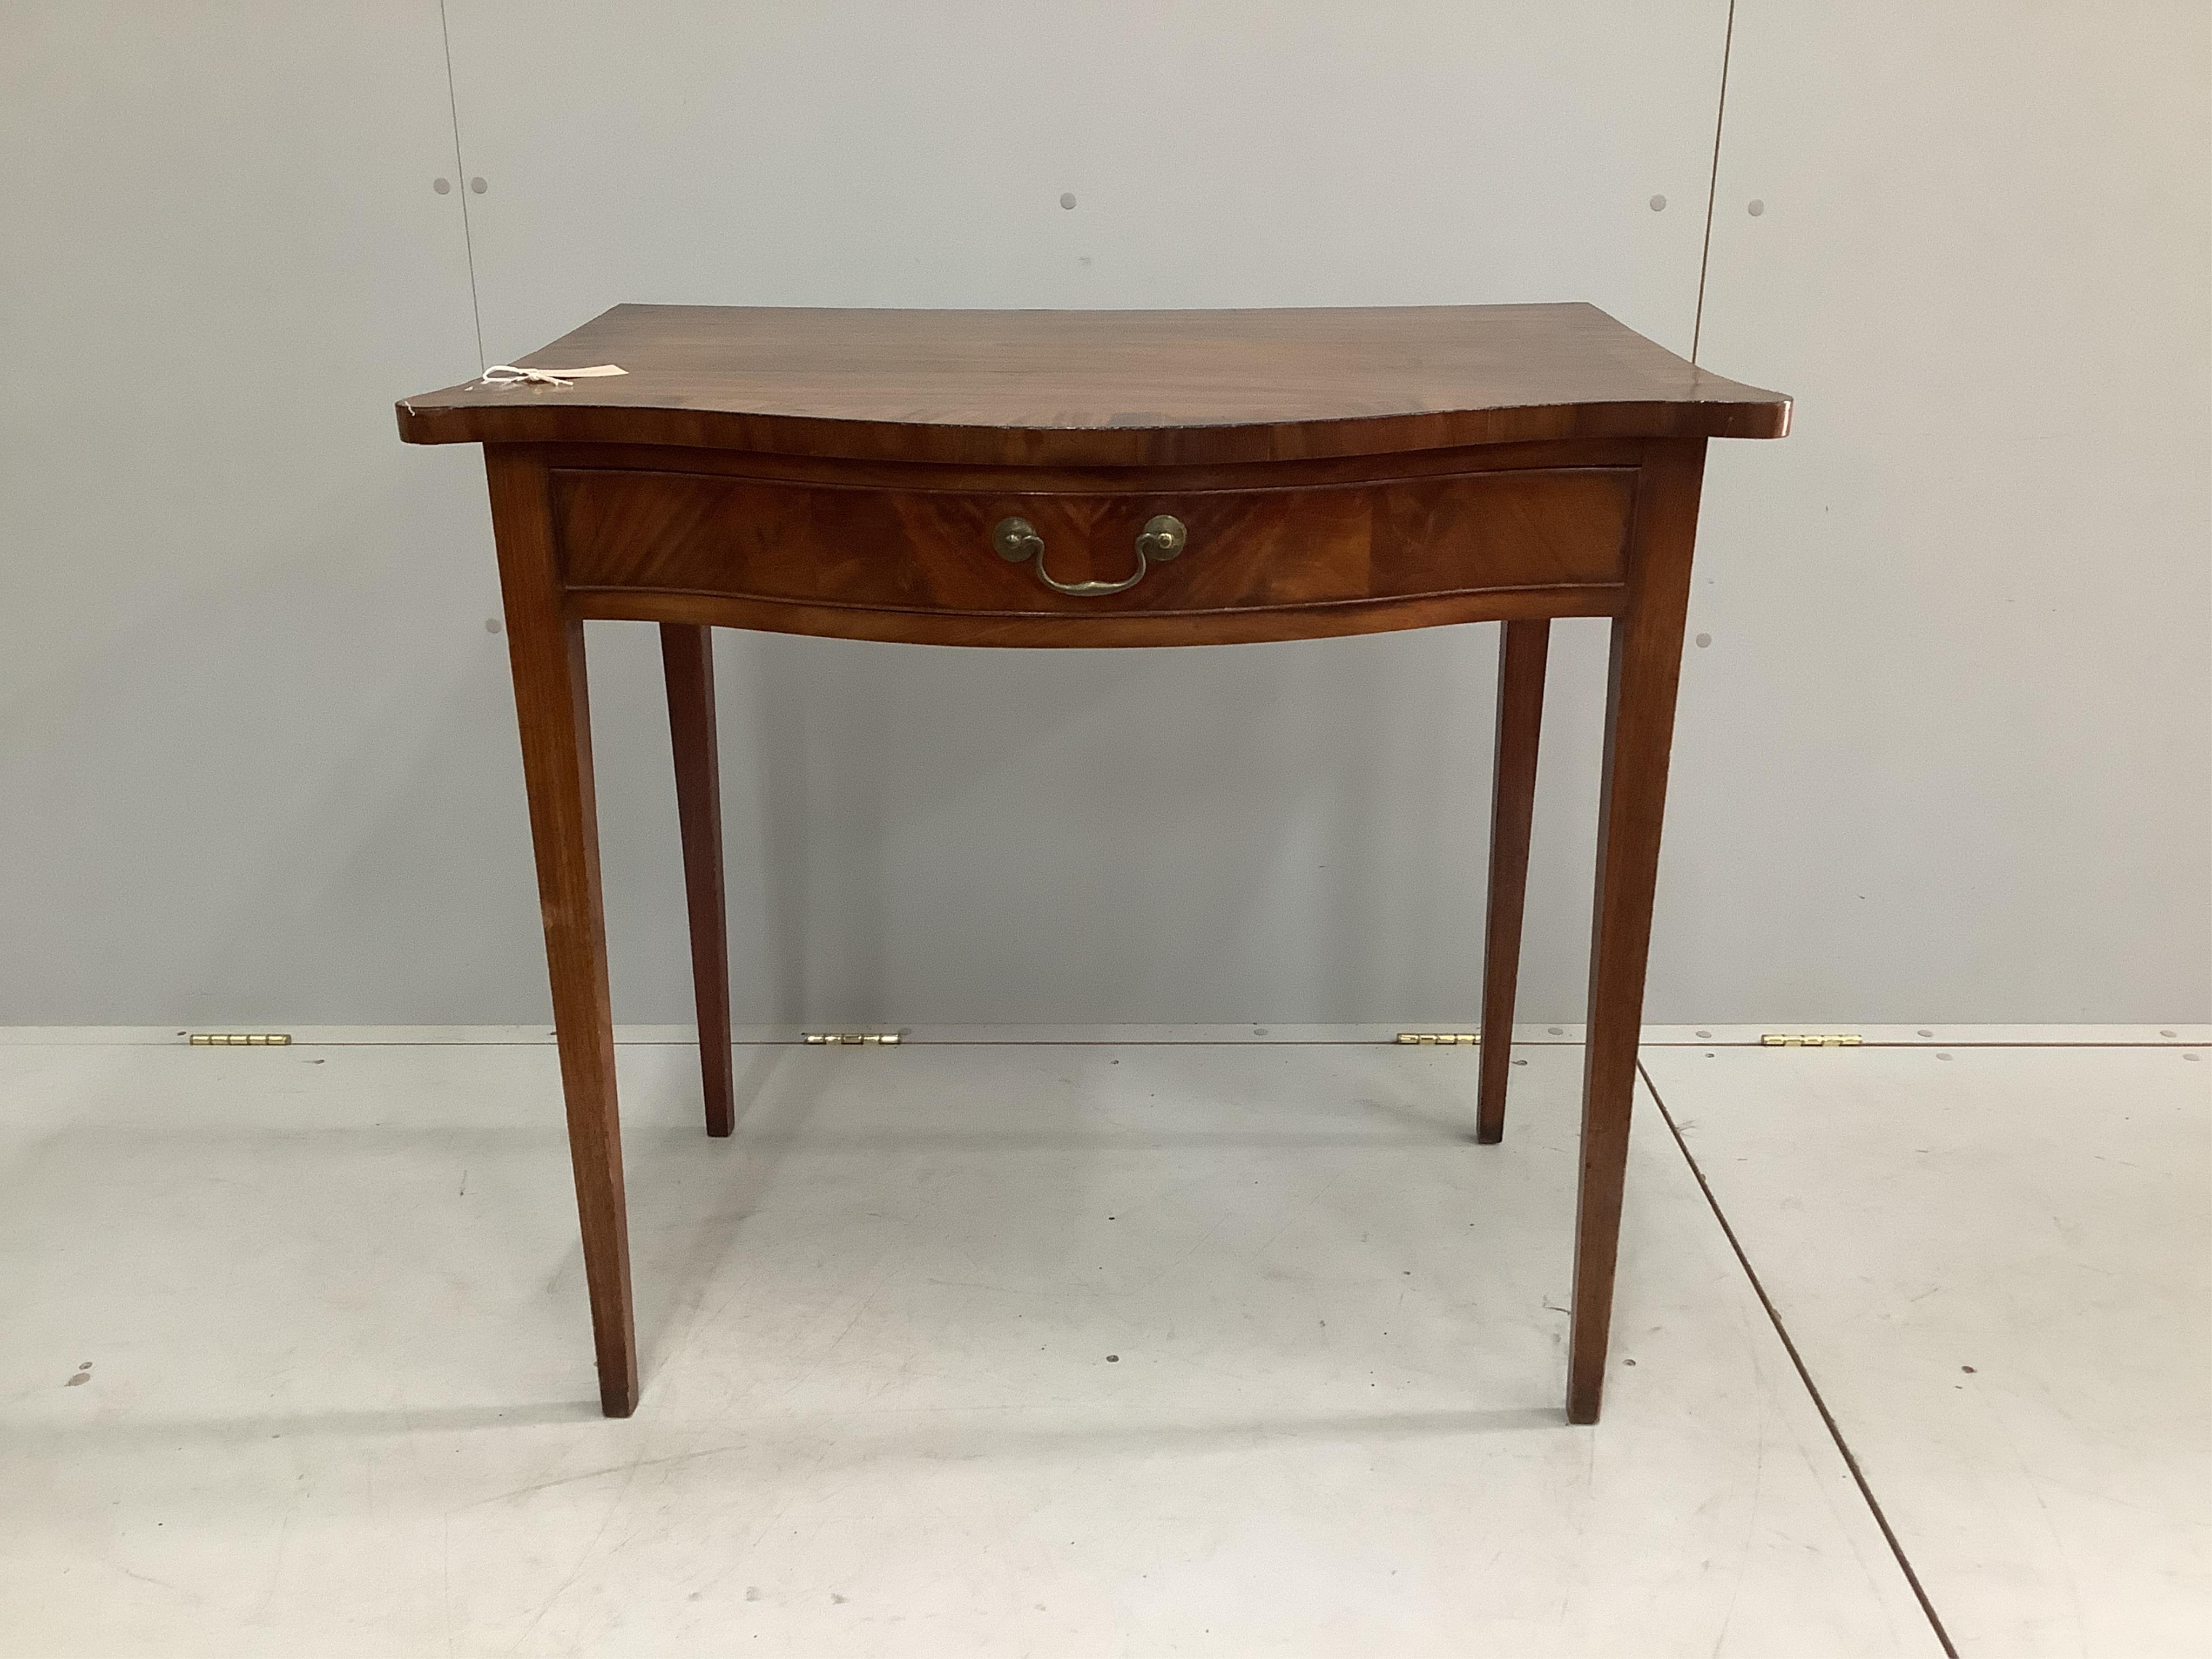 A George III banded mahogany serpentine serving table, width 91cm, depth 58cm, height 82cm. Condition - fair